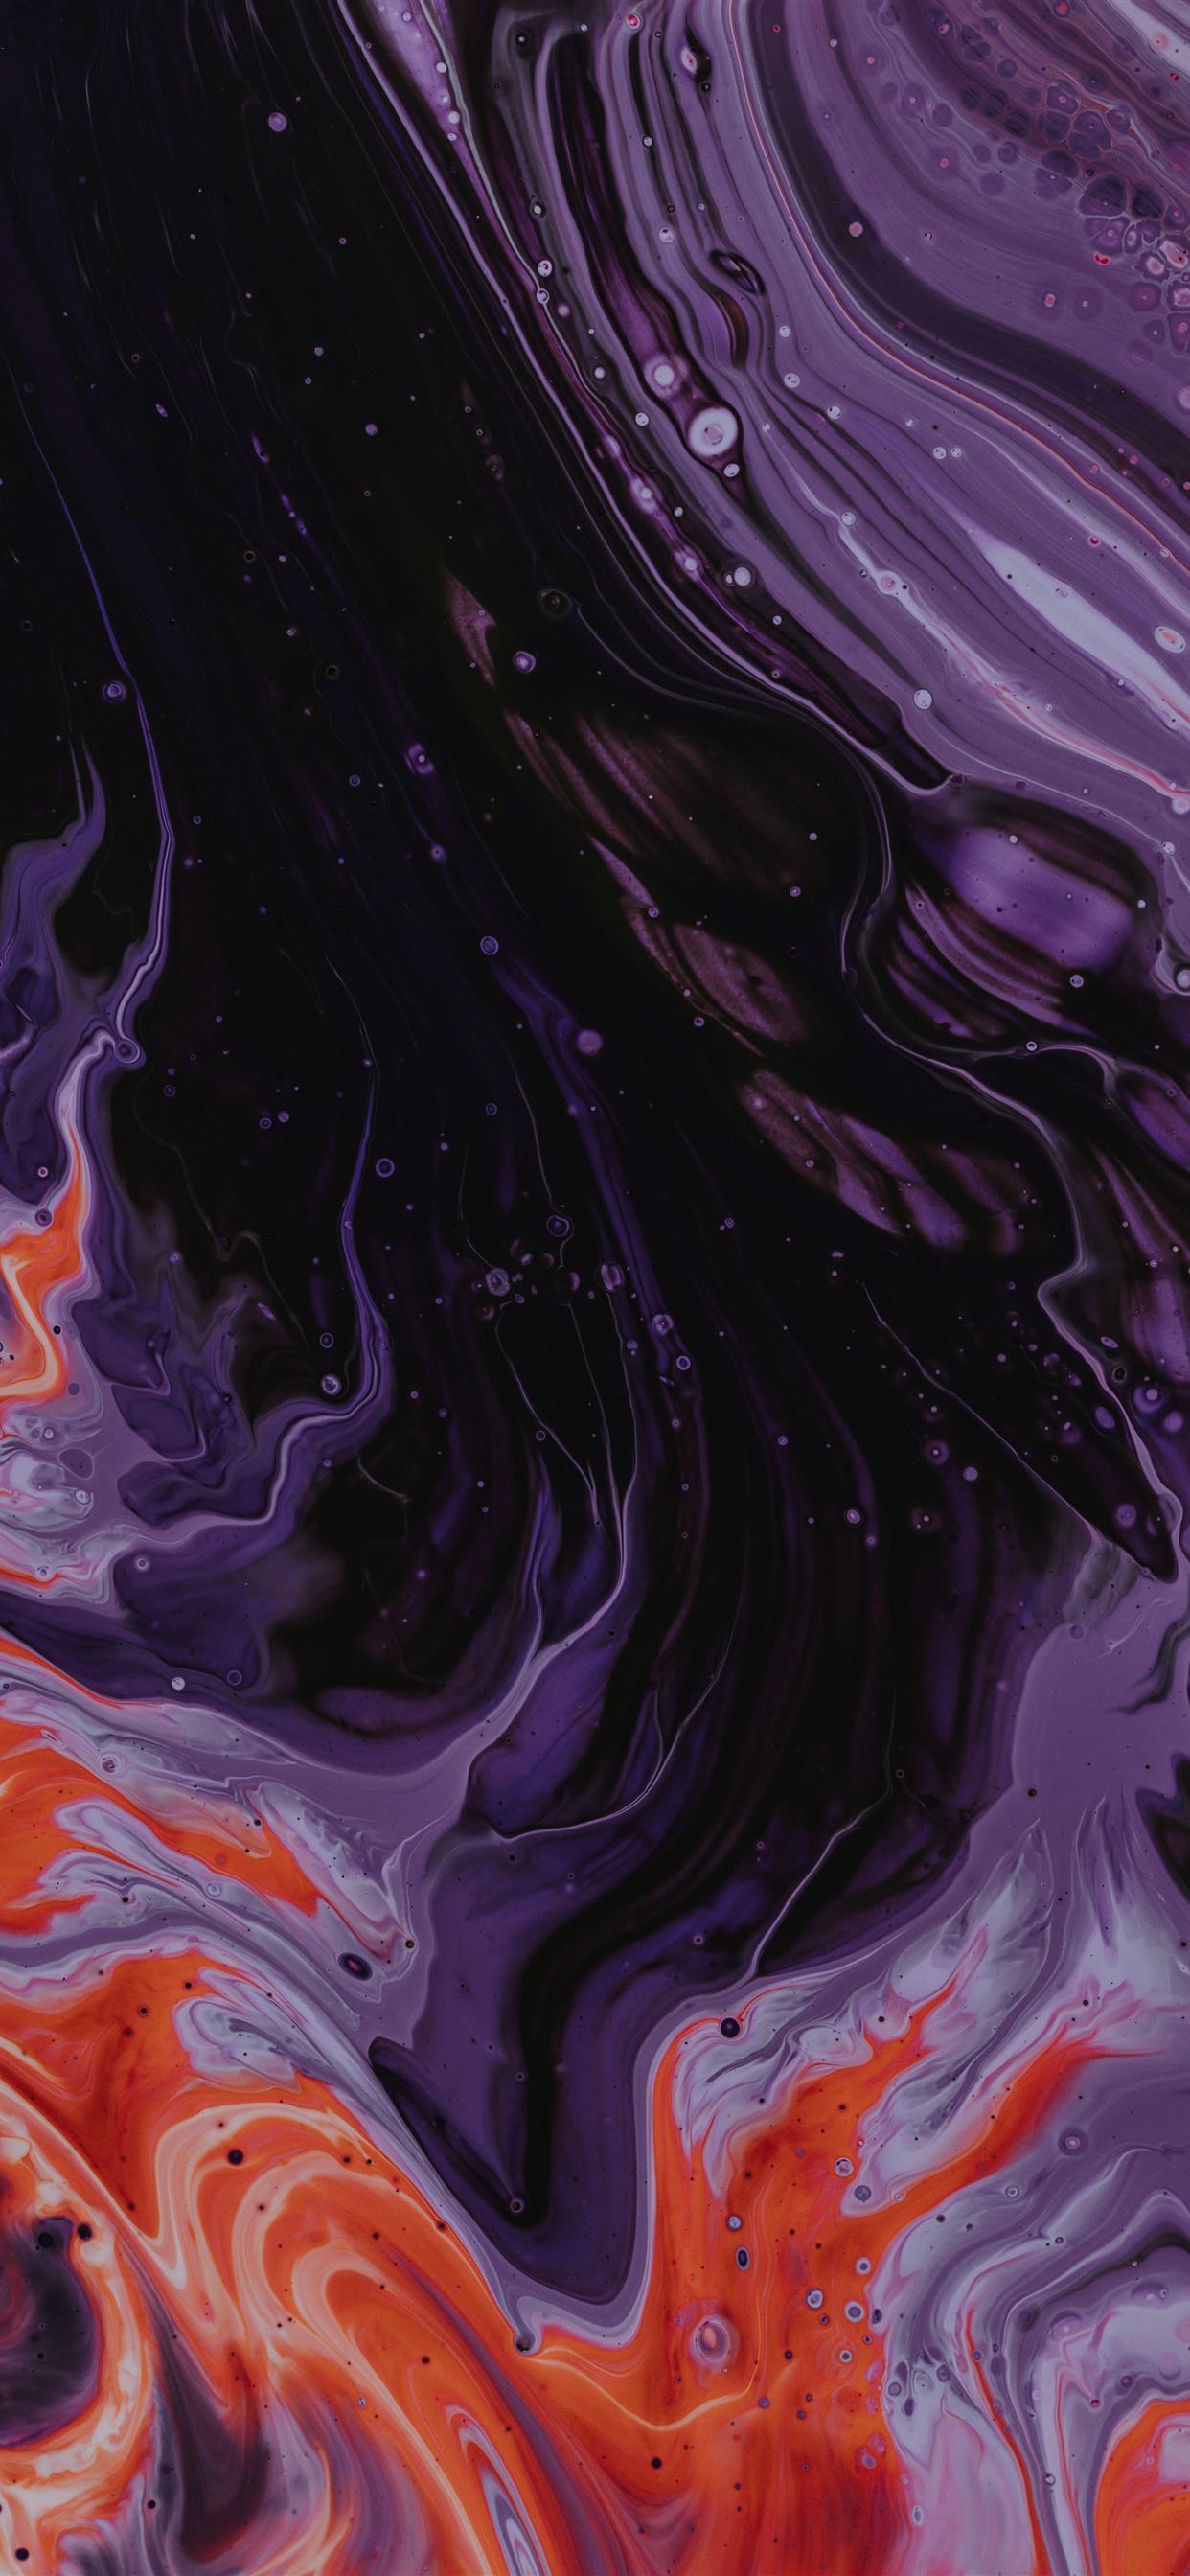 purple black and orange abstract paintin iPhone Wallpaper Free